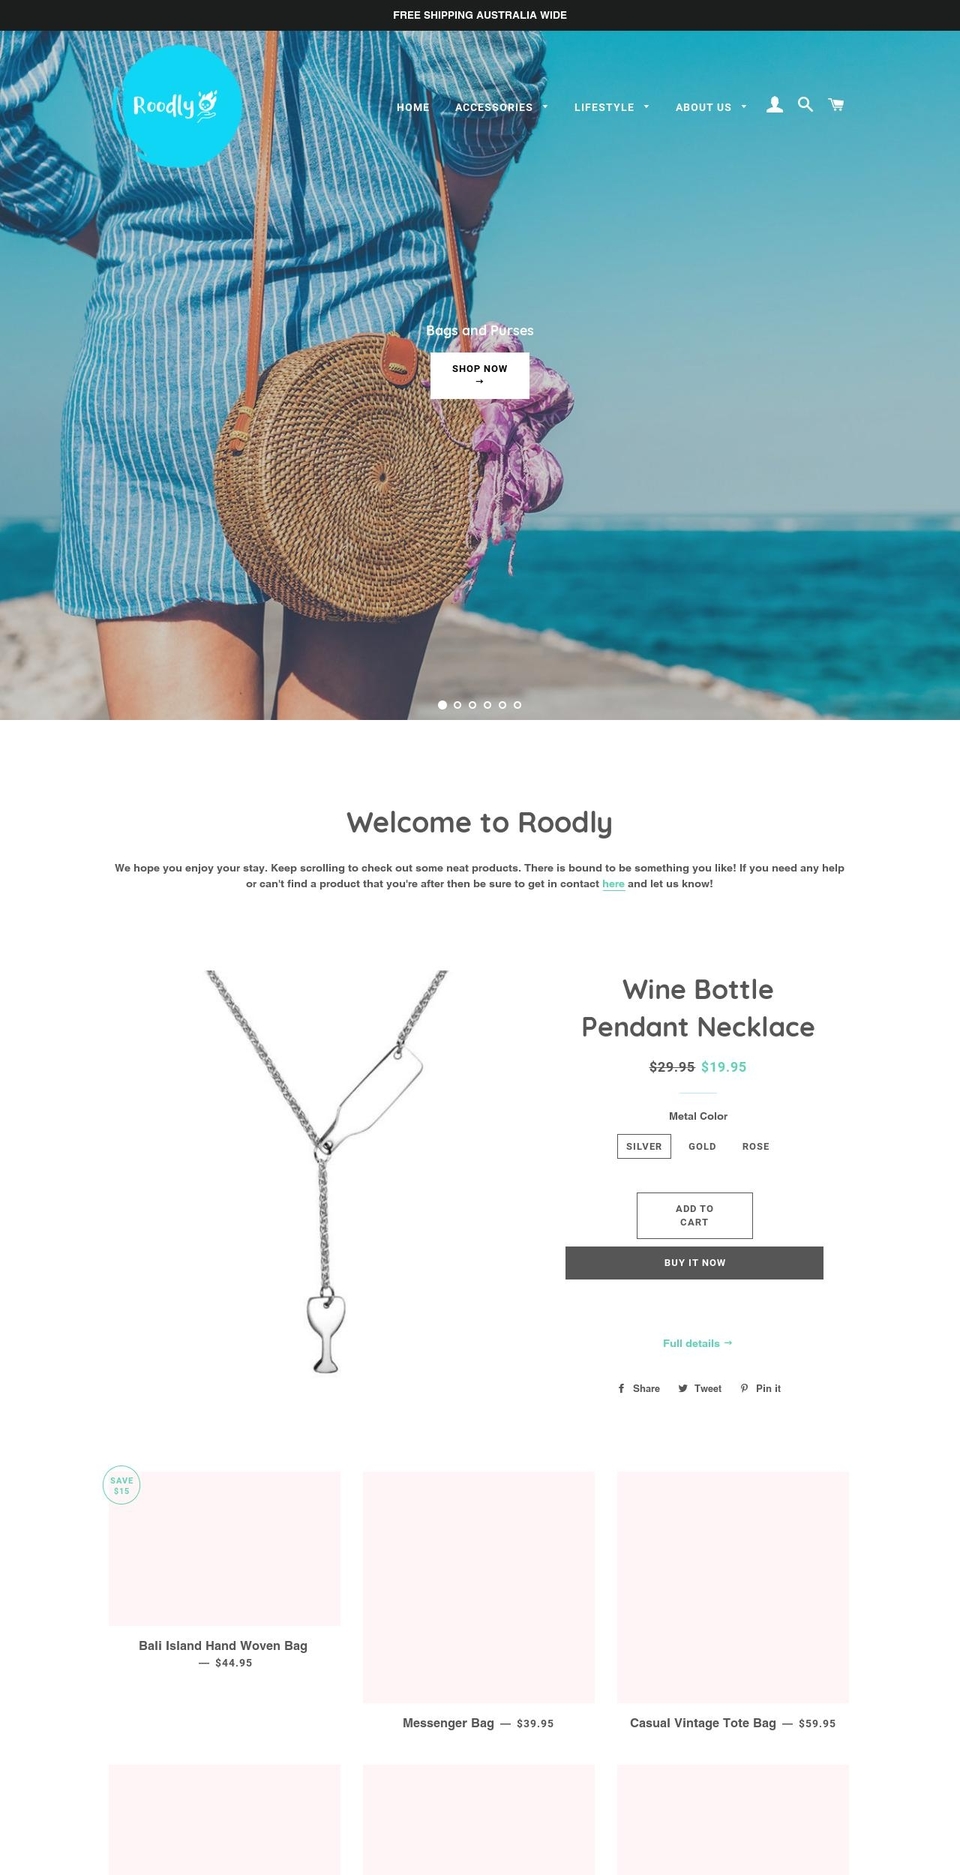 Pre-launch Shopify theme site example roodly.com